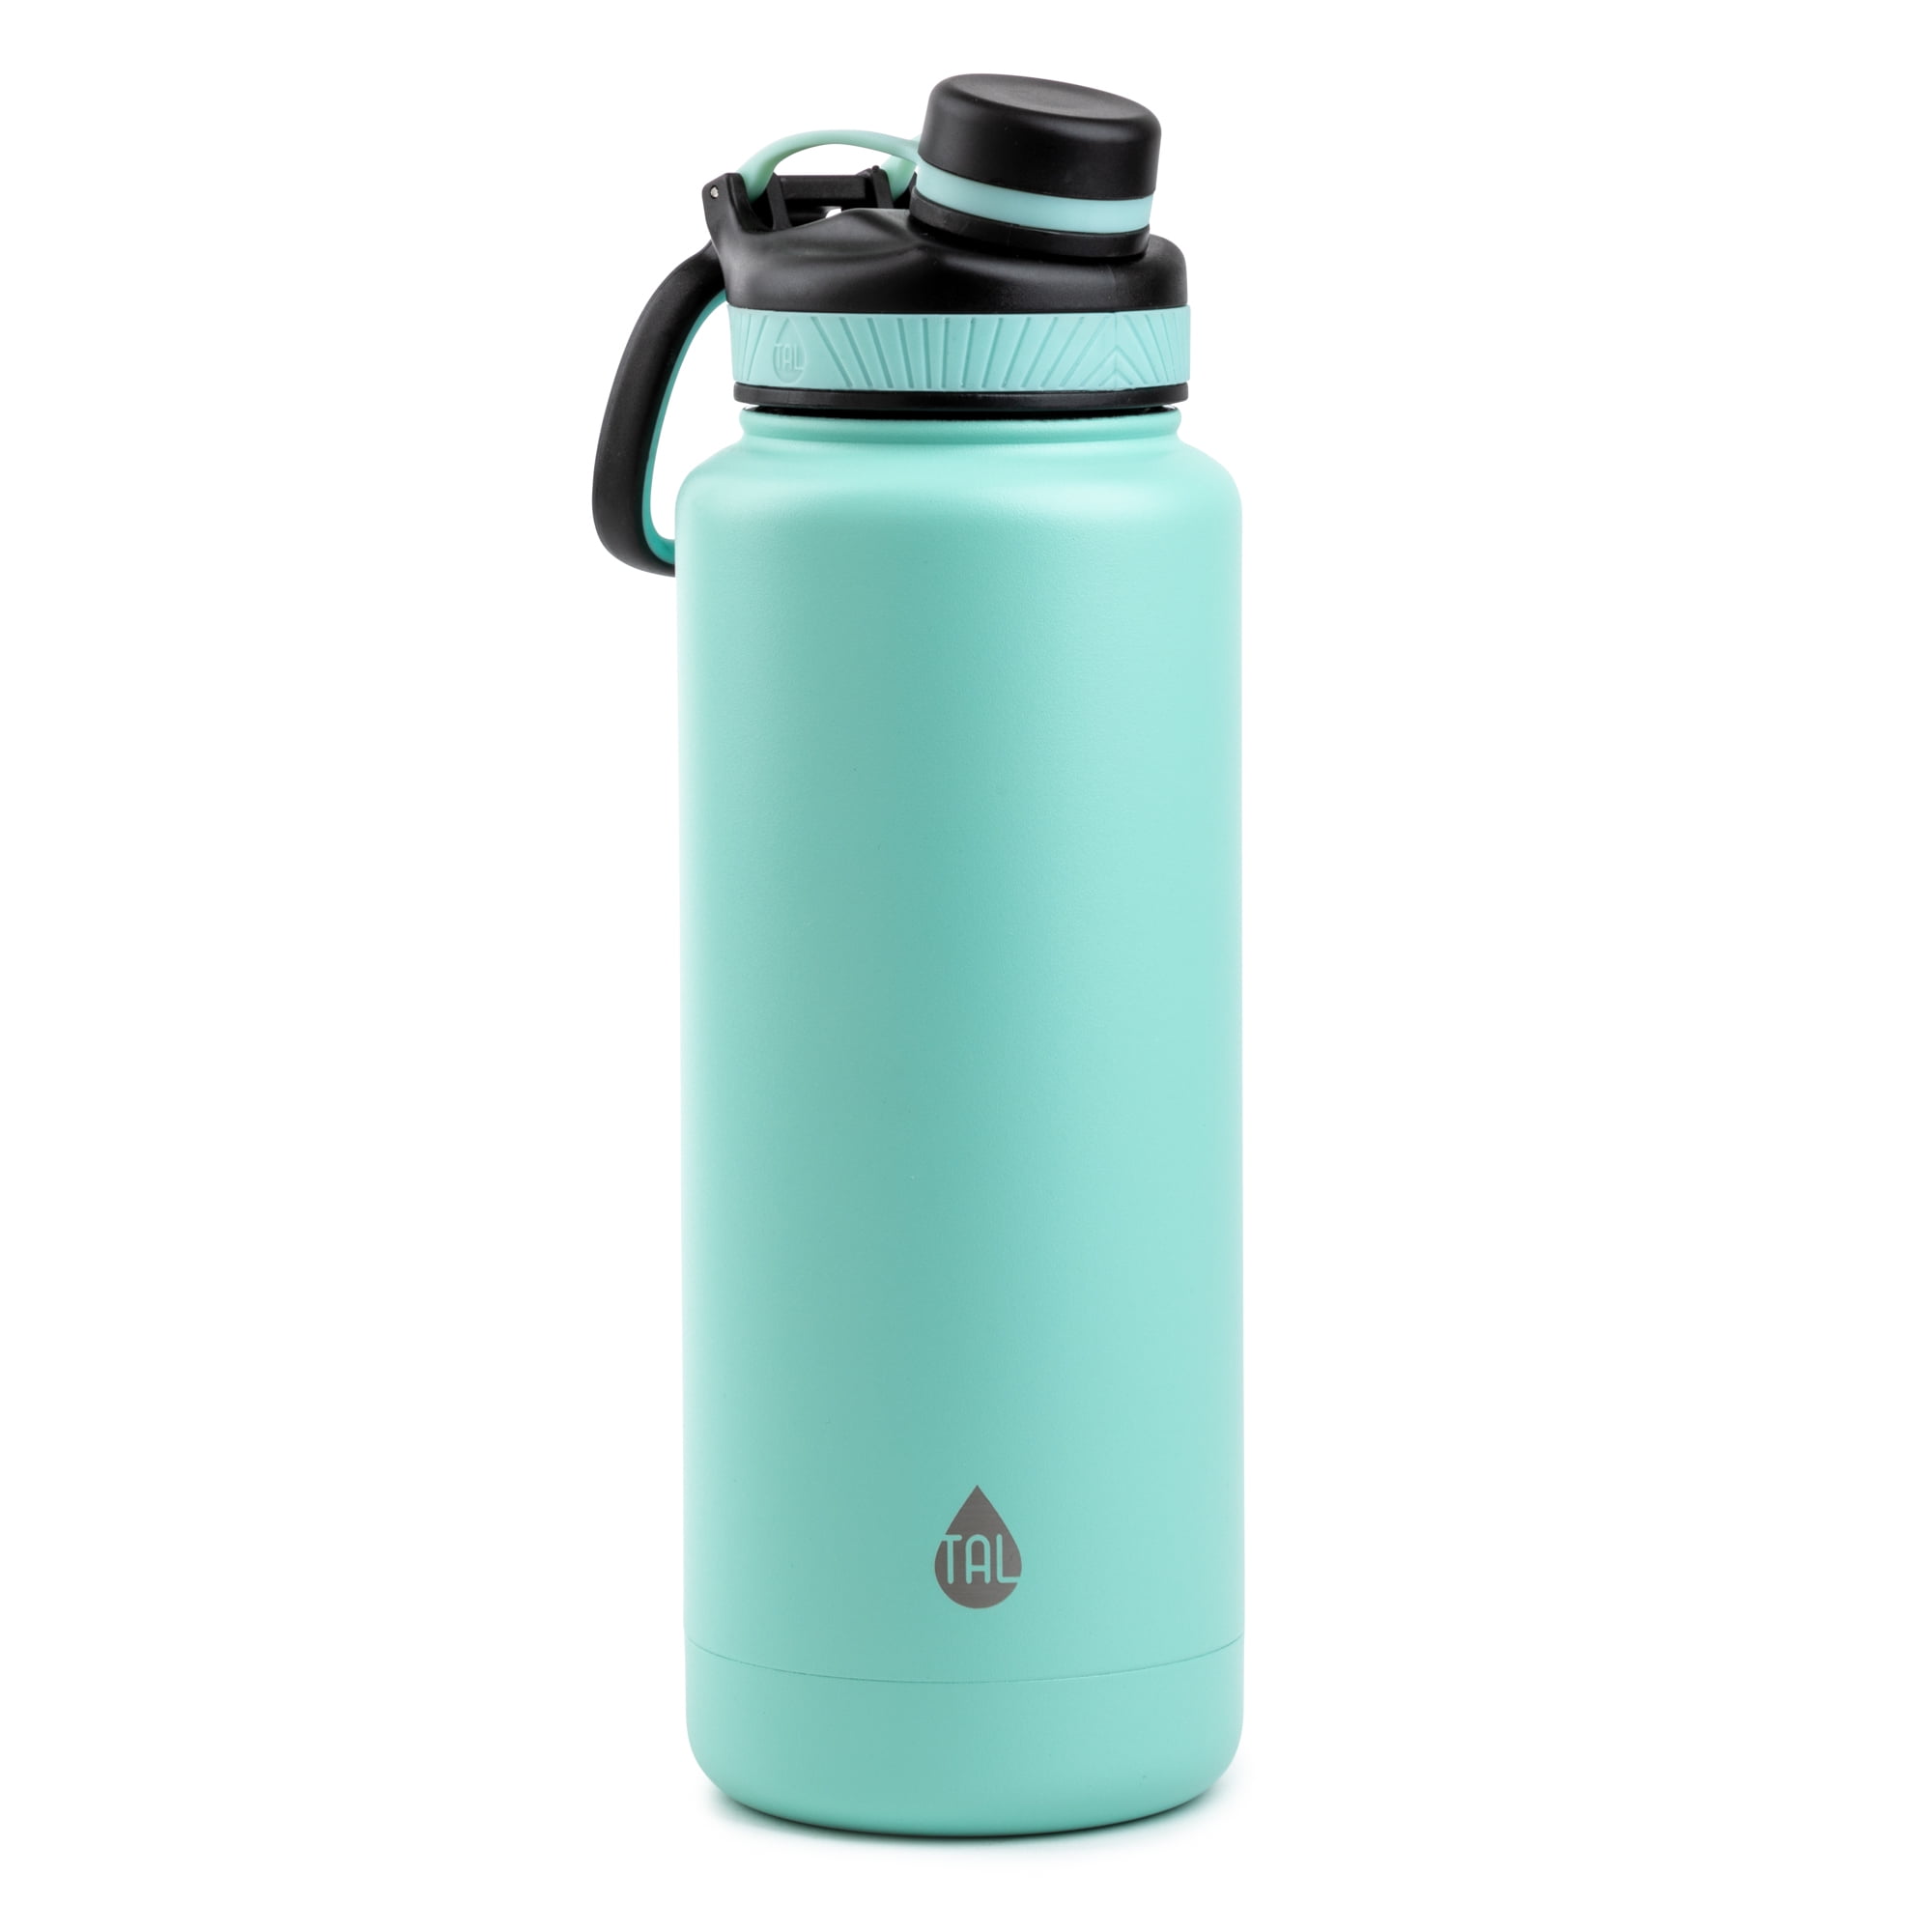 FineDine Insulated Water Bottles with Straw - 40 Oz Stainless